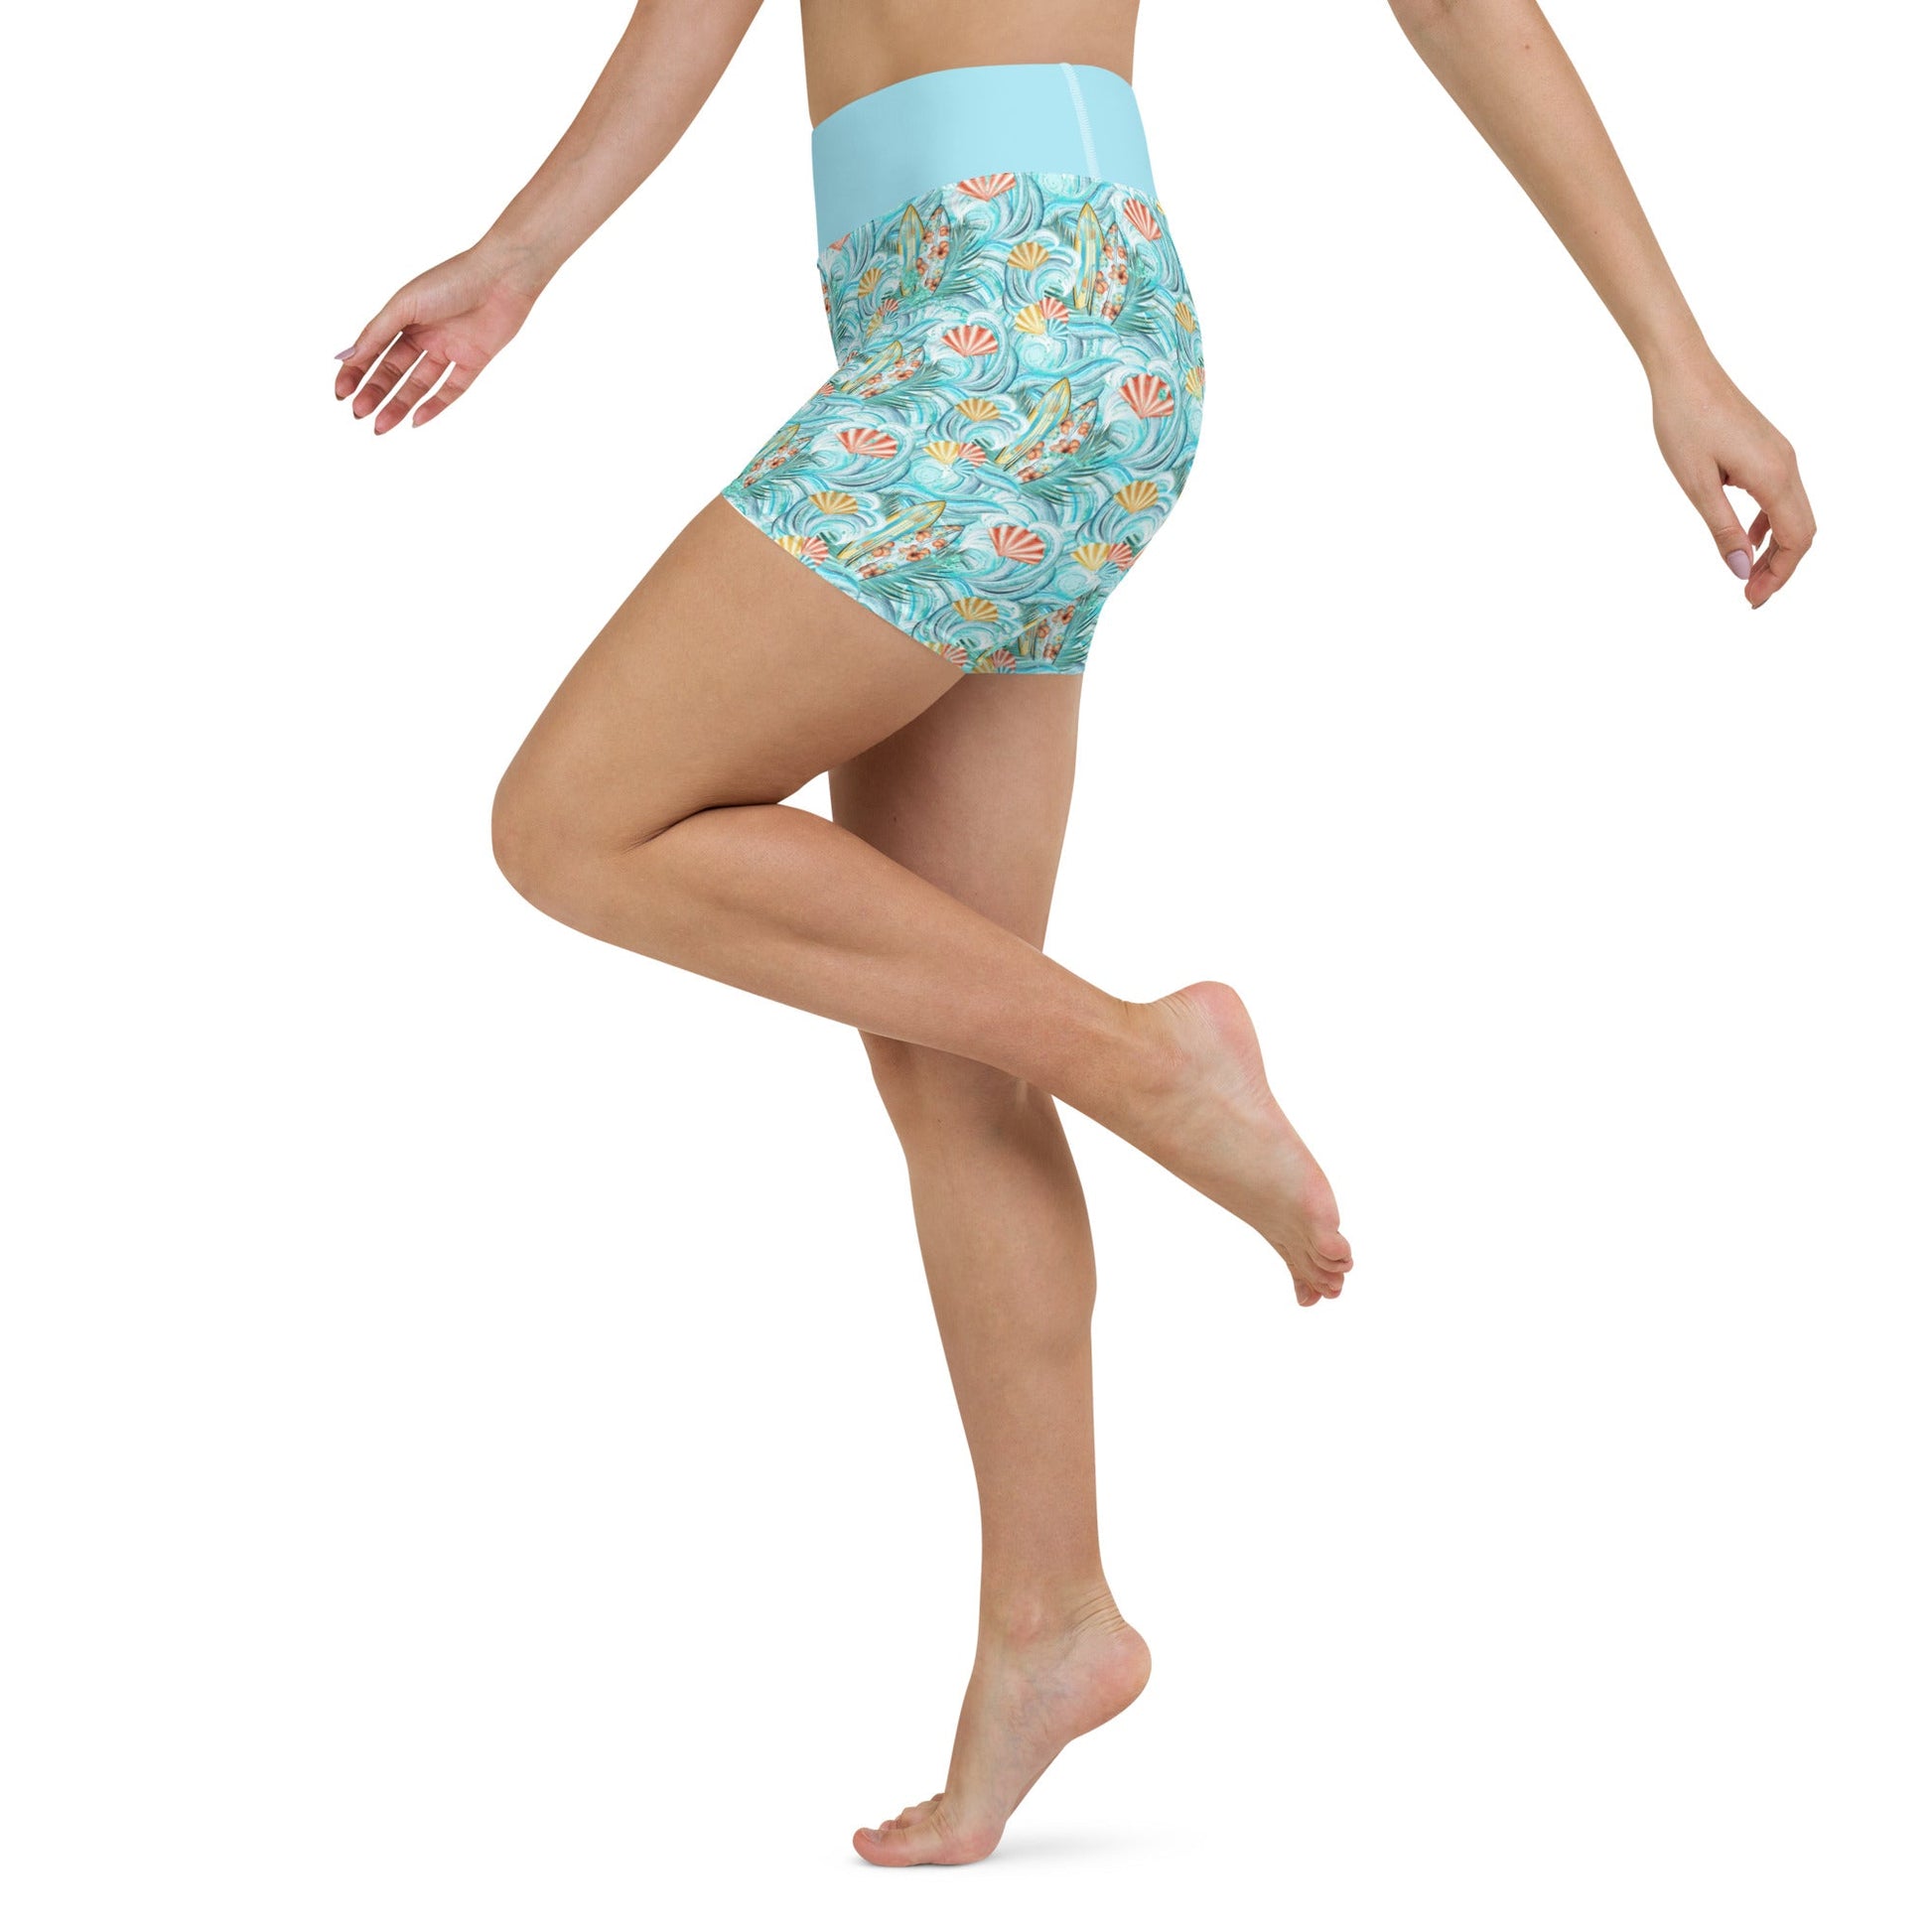 Be Extra! Summer Vibes Yoga Shorts - BeExtra! Apparel & More